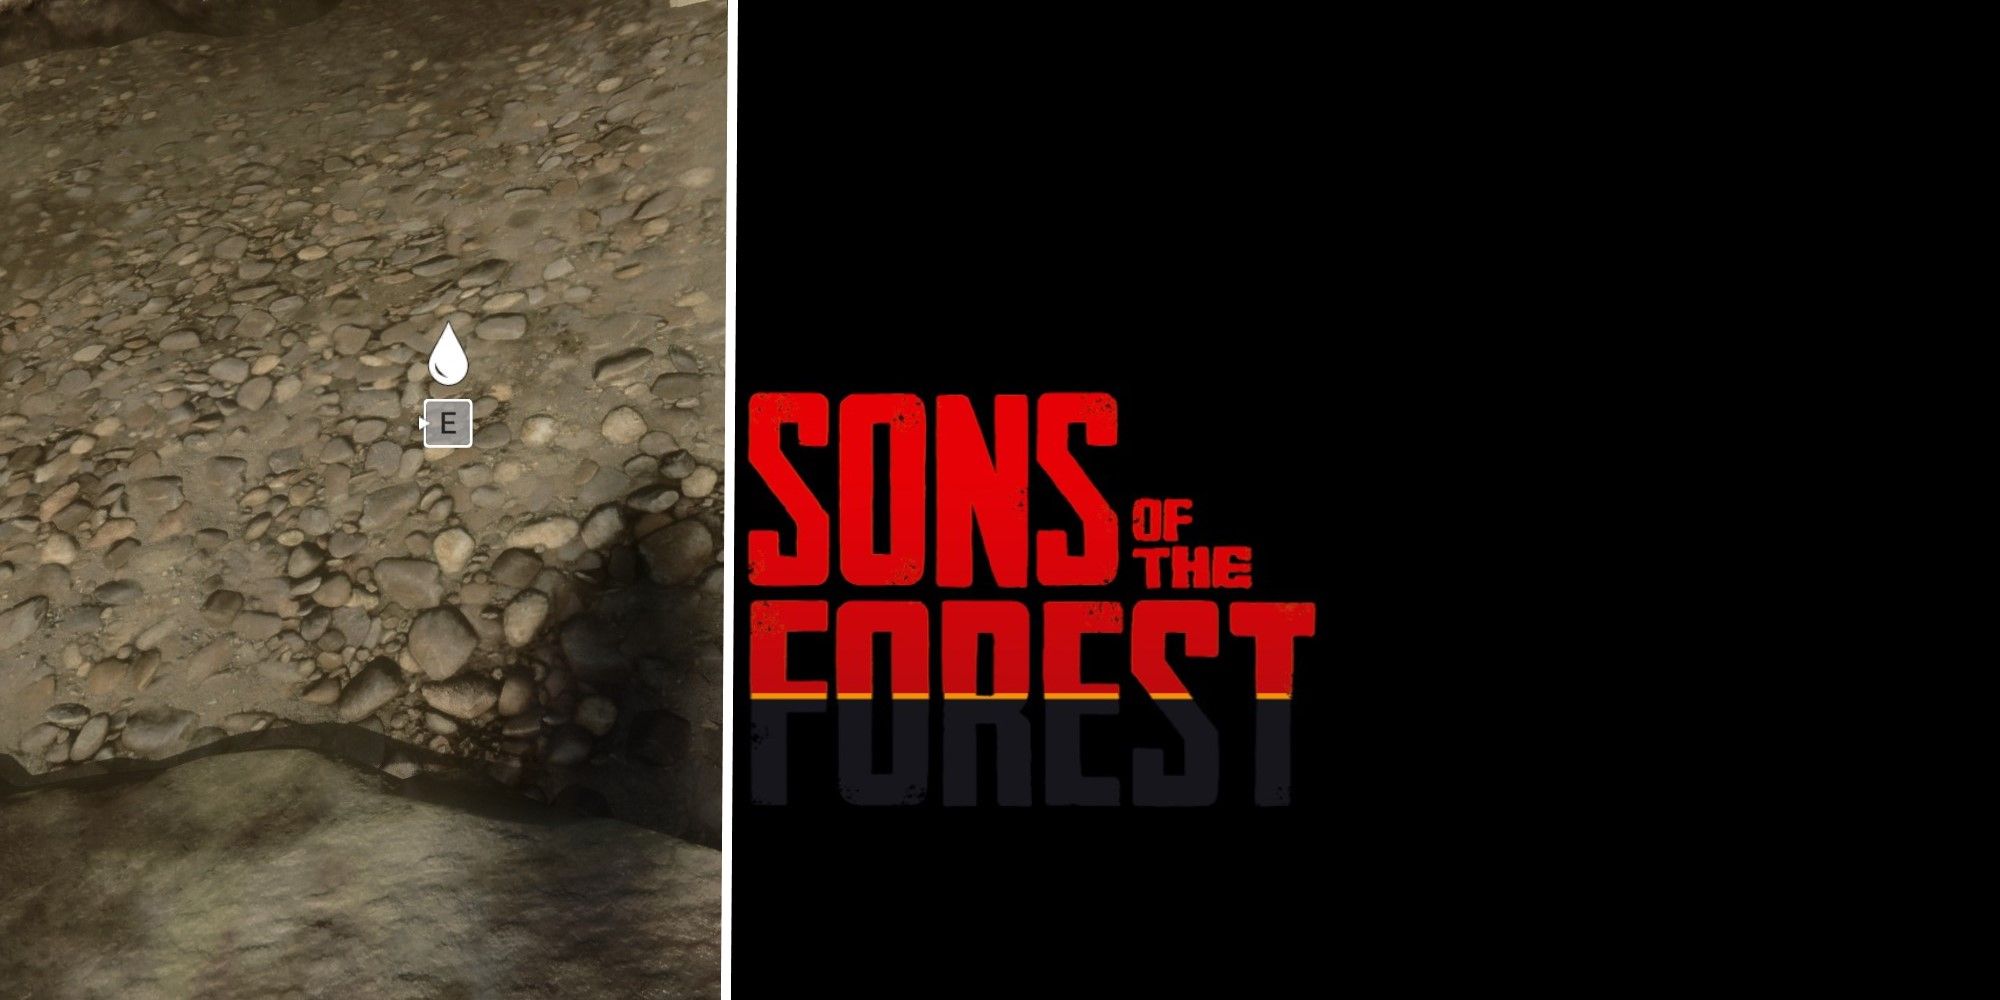 Sons of the Forest: How to Find and Collect Water